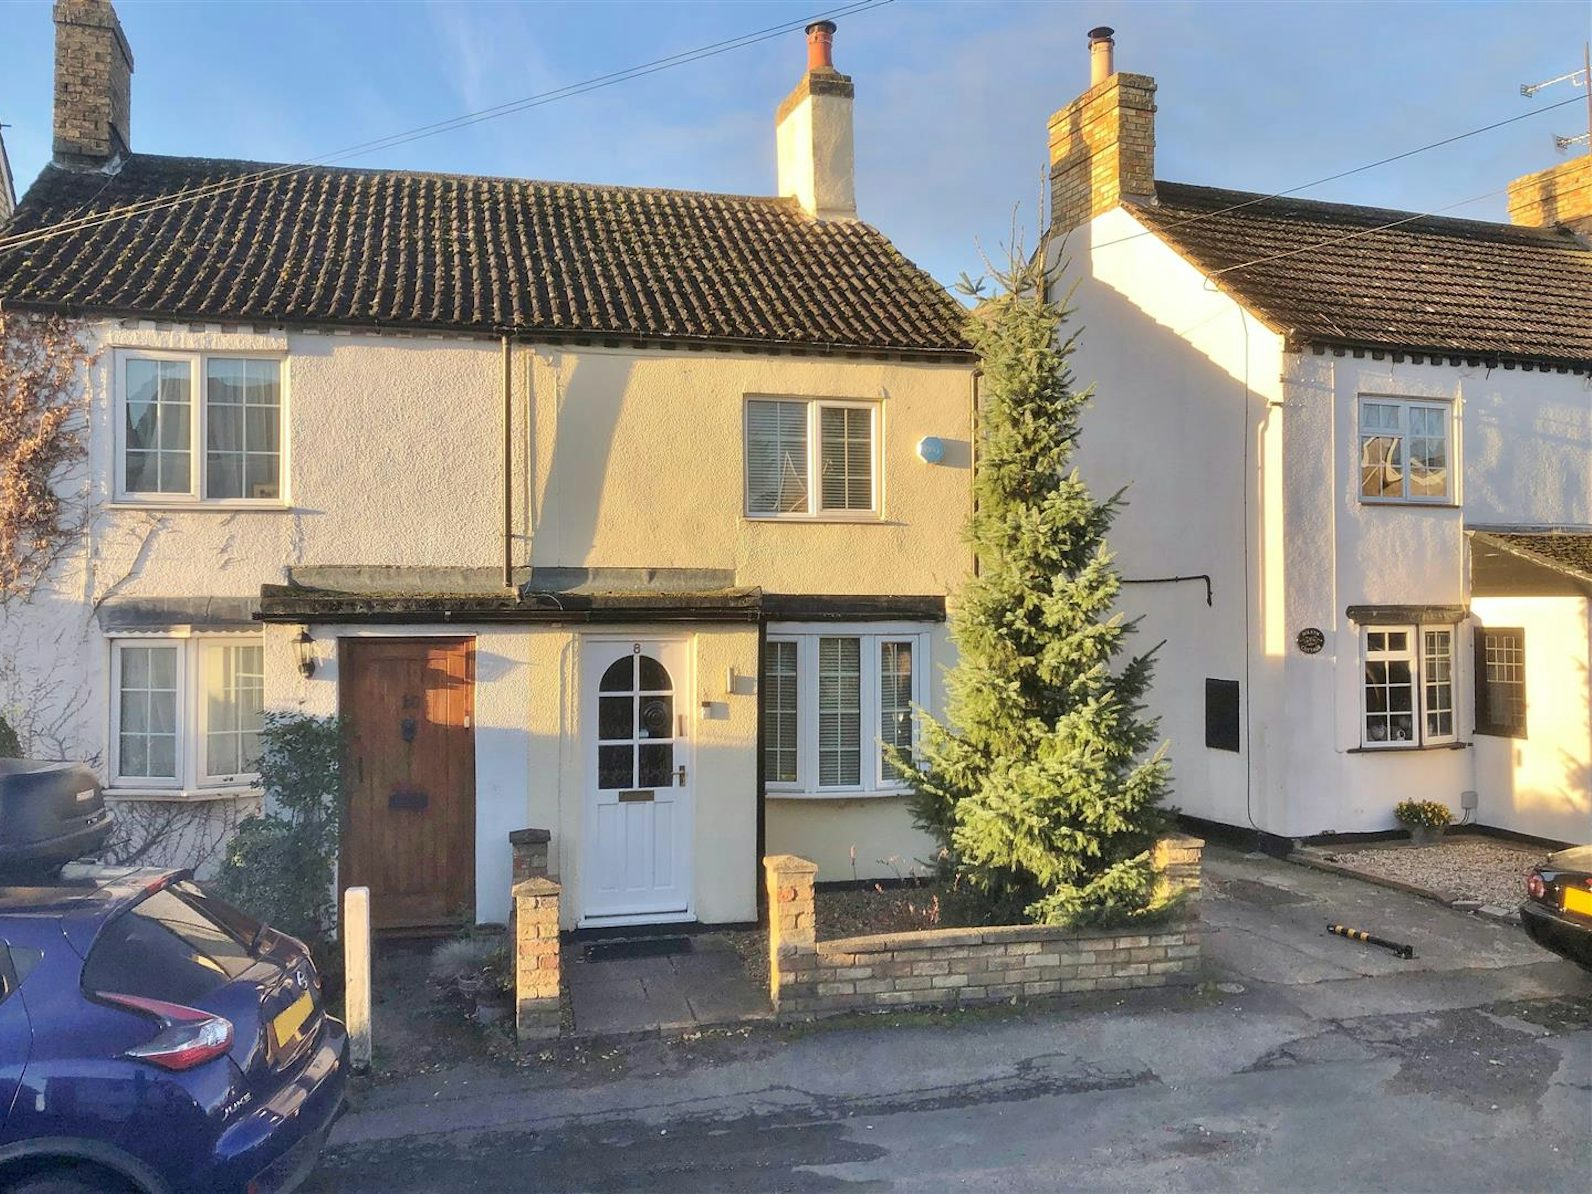 2 bedroom property for sale in lower stondon henlow - 315,000